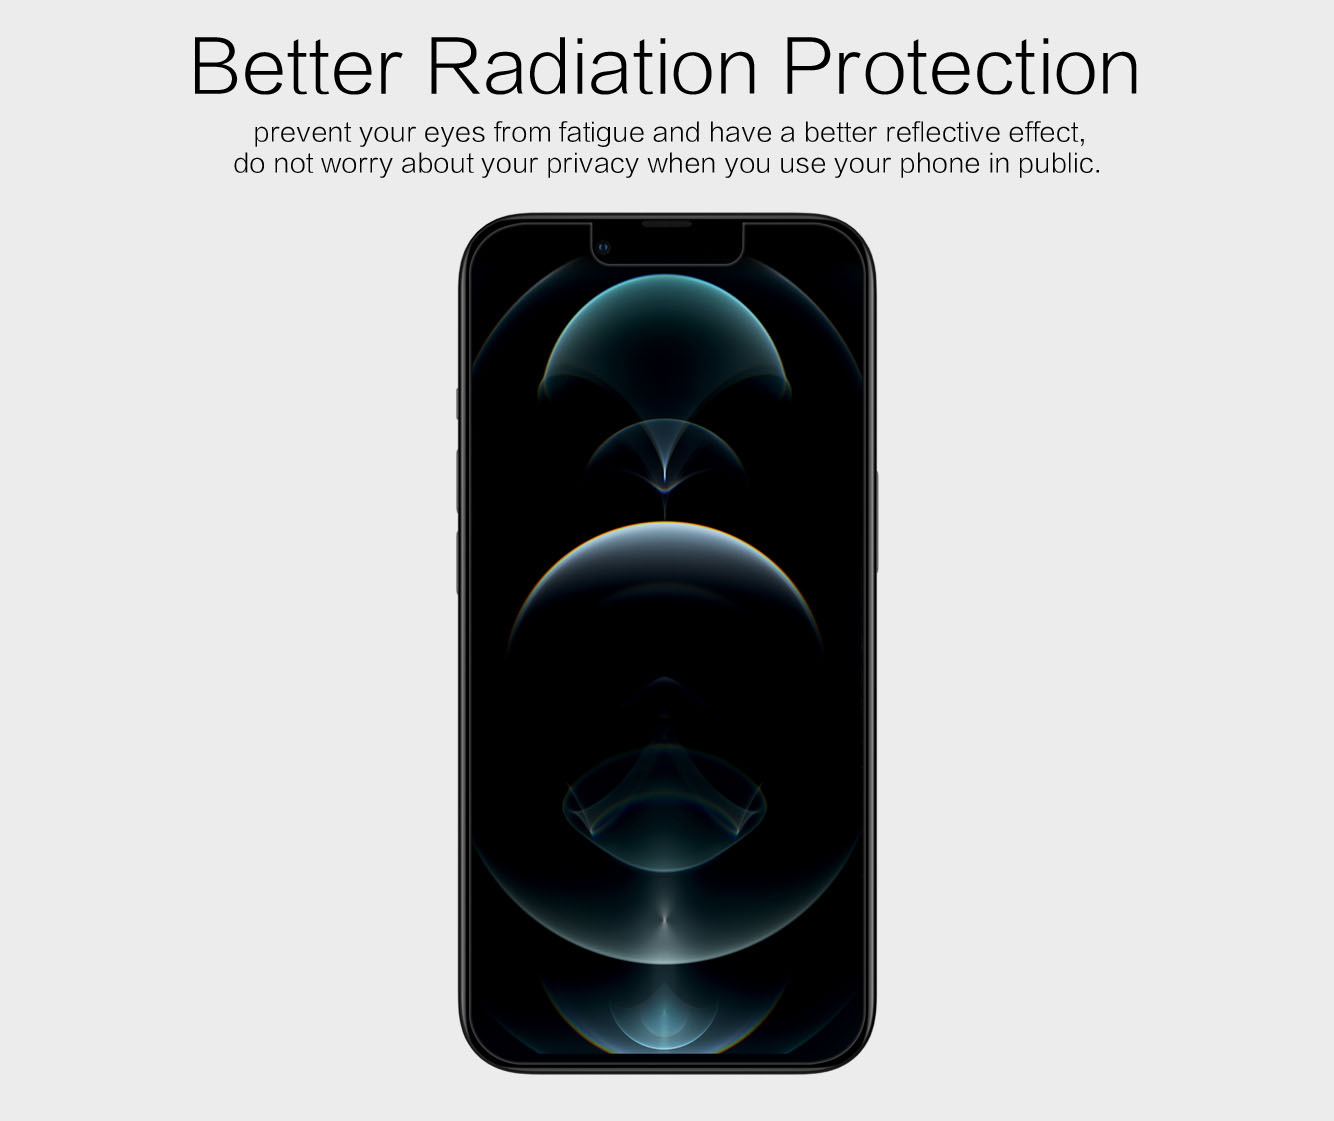 iPhone 13/13 Pro screen protector